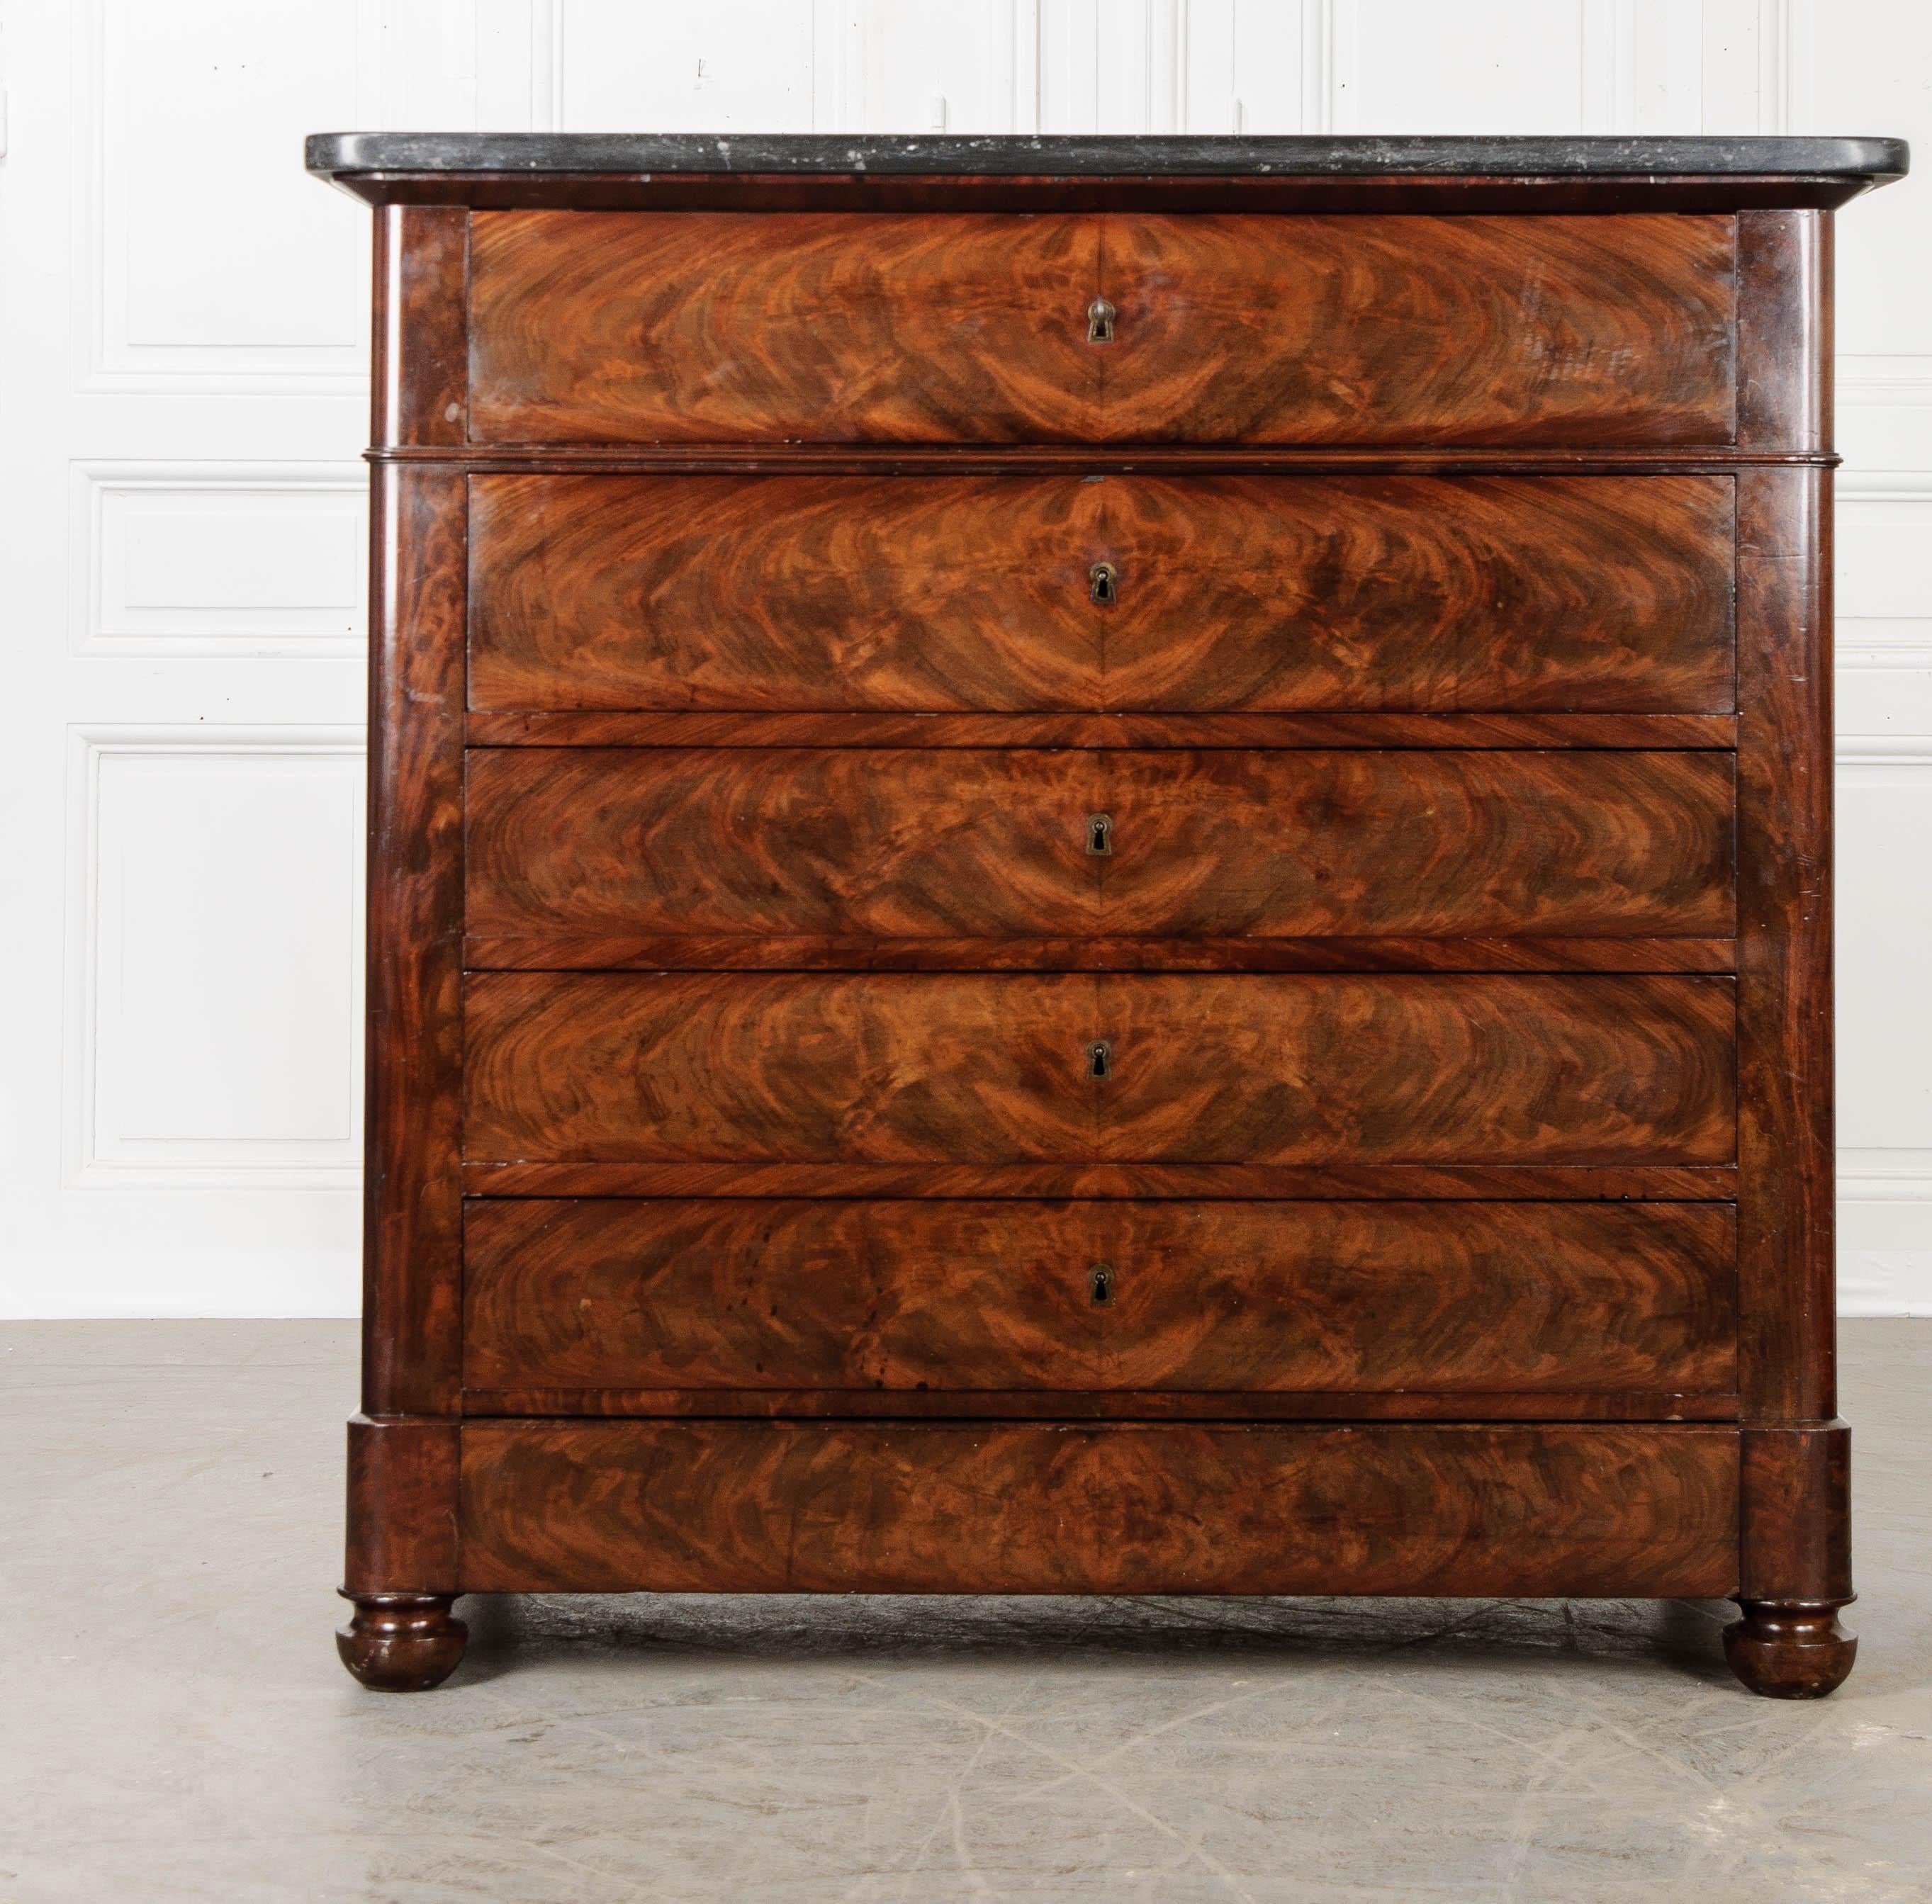 Brilliantly bookmatched mahogany graces the drawer fronts of this 19th century French commode whose resourceful design incorporates a fold out desk into one of its drawers. The case piece has six drawers in total, with the bottom-most hidden in the